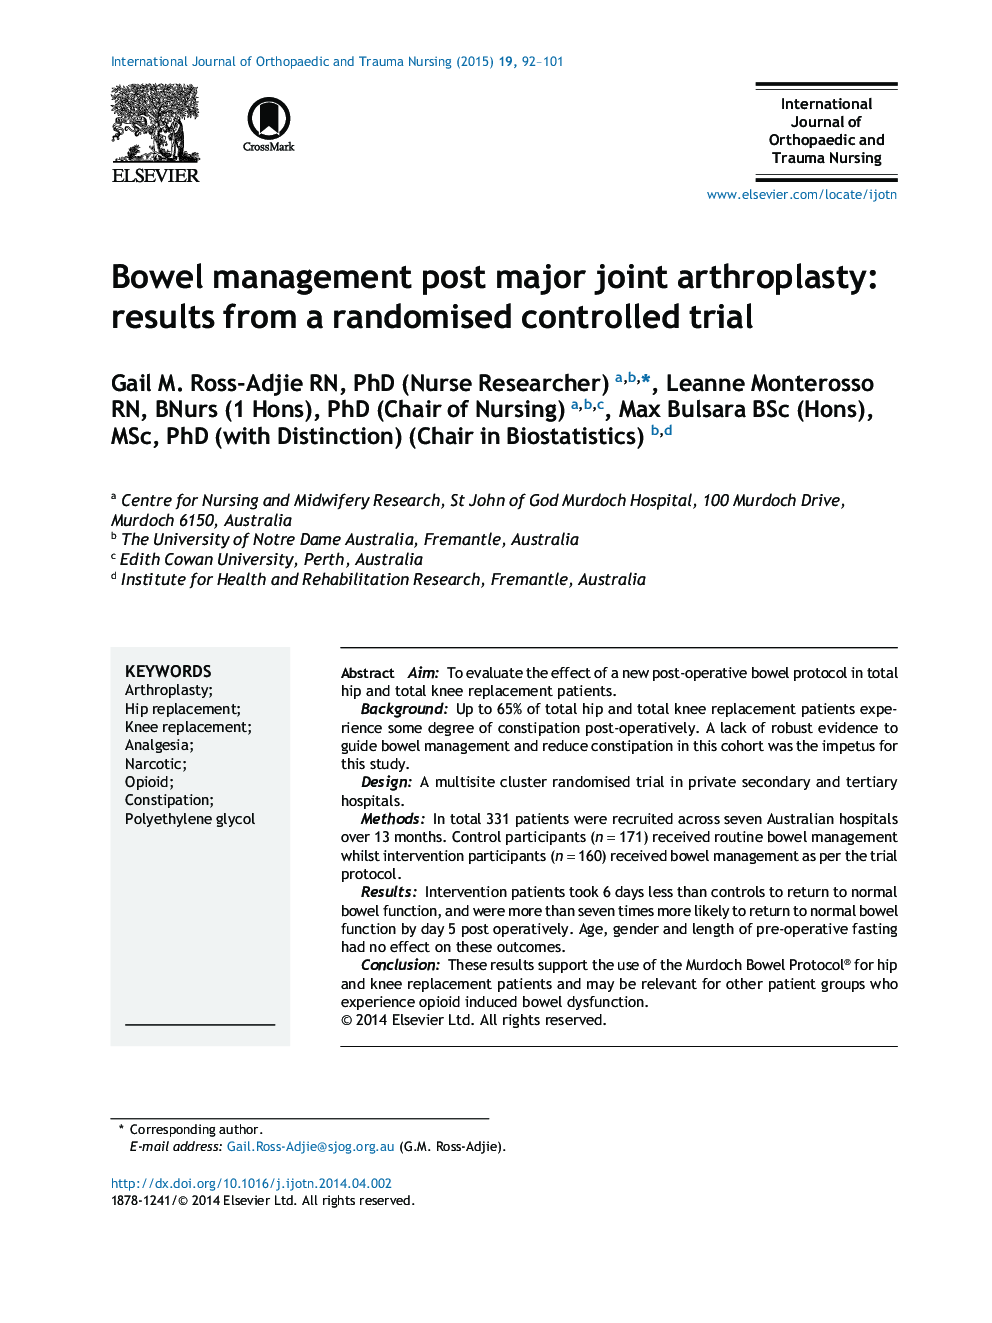 Bowel management post major joint arthroplasty: results from a randomised controlled trial